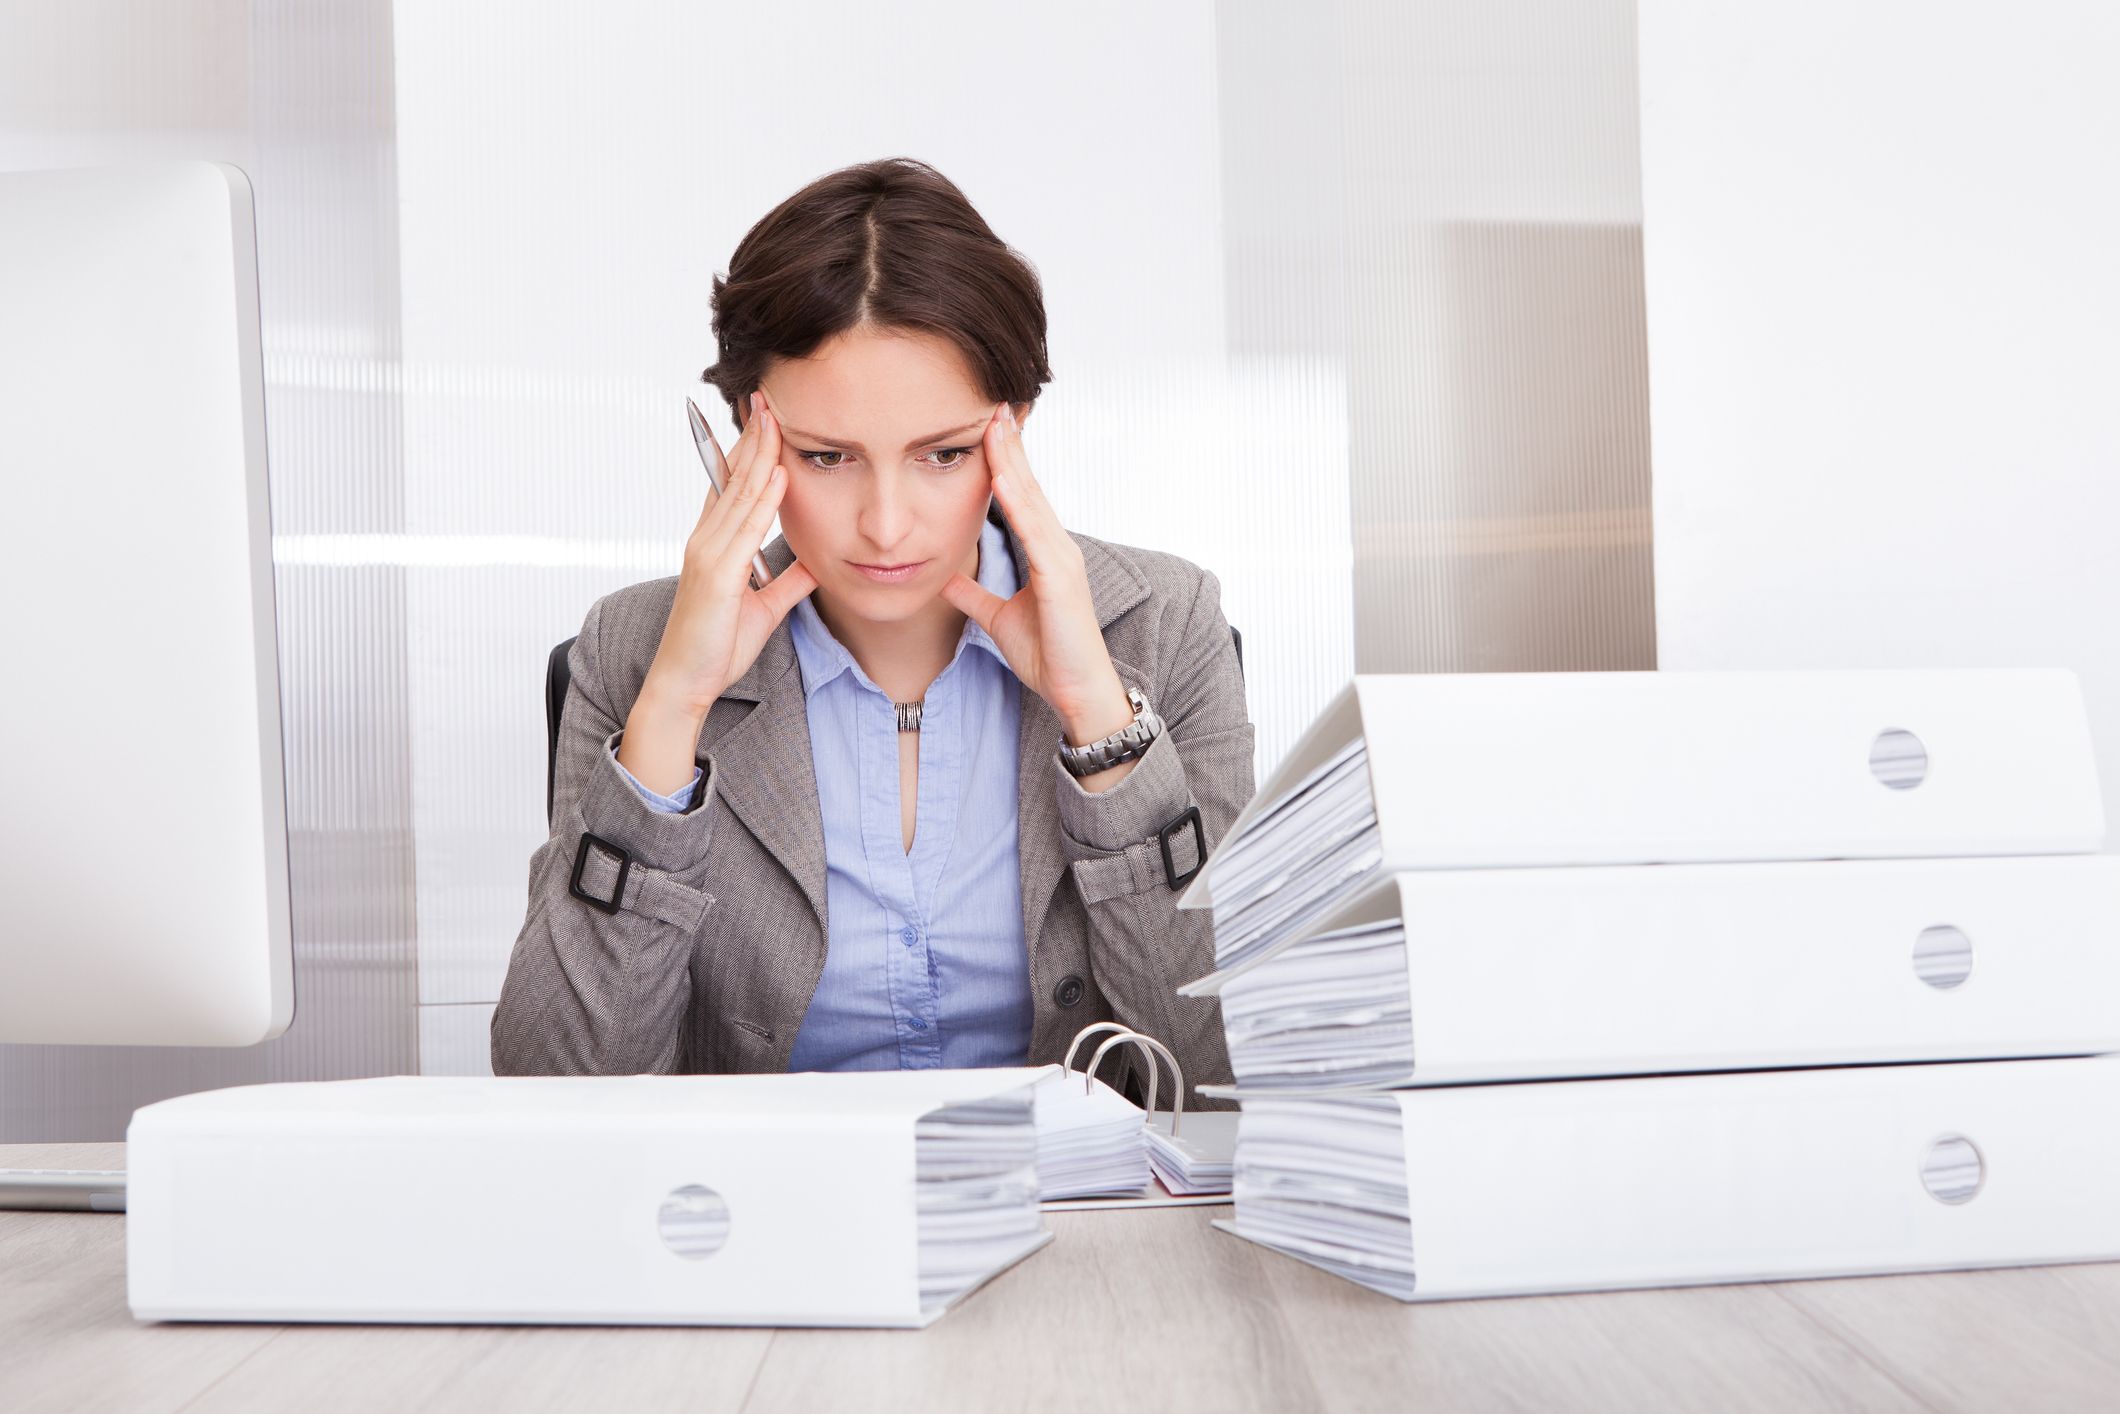 Fed up with Your Job? Here’s How to Stop Being a Workaholic